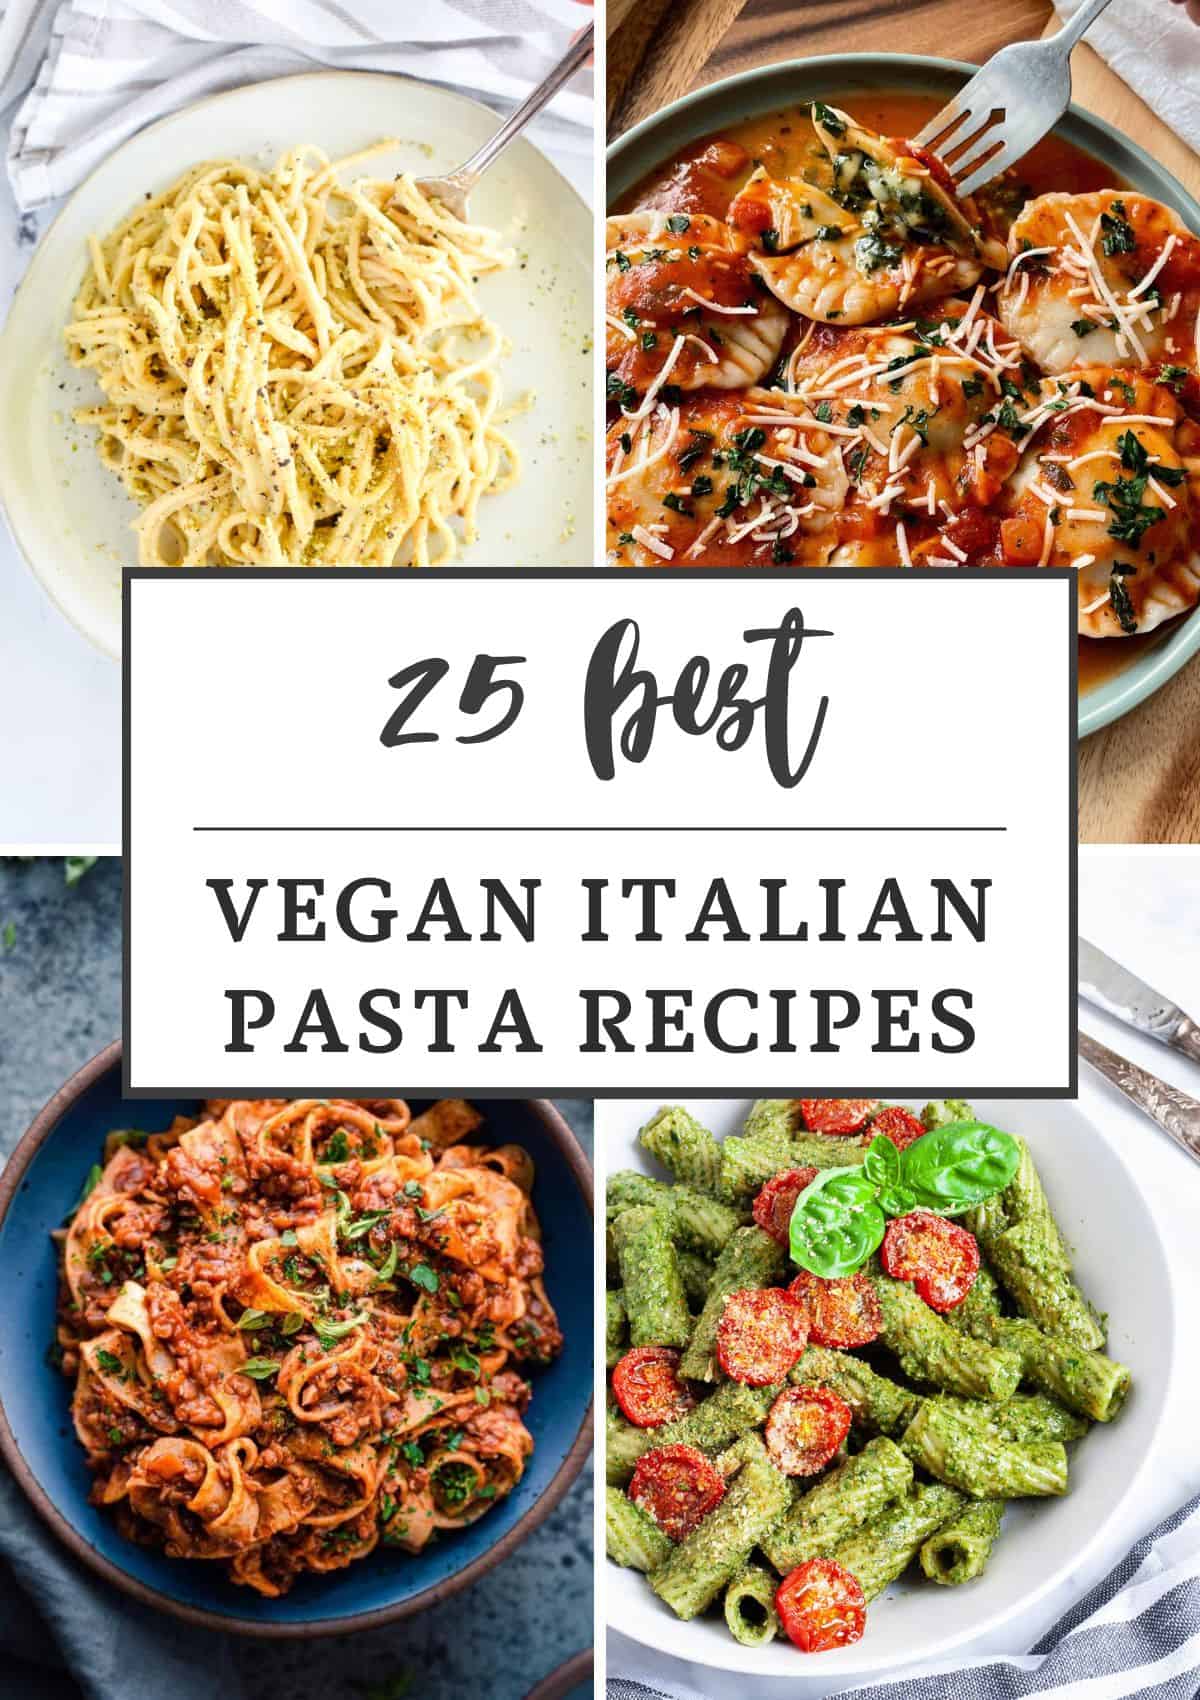 collage of 4 of the vegan Italian pasta recipes from the collection with text title overlay.